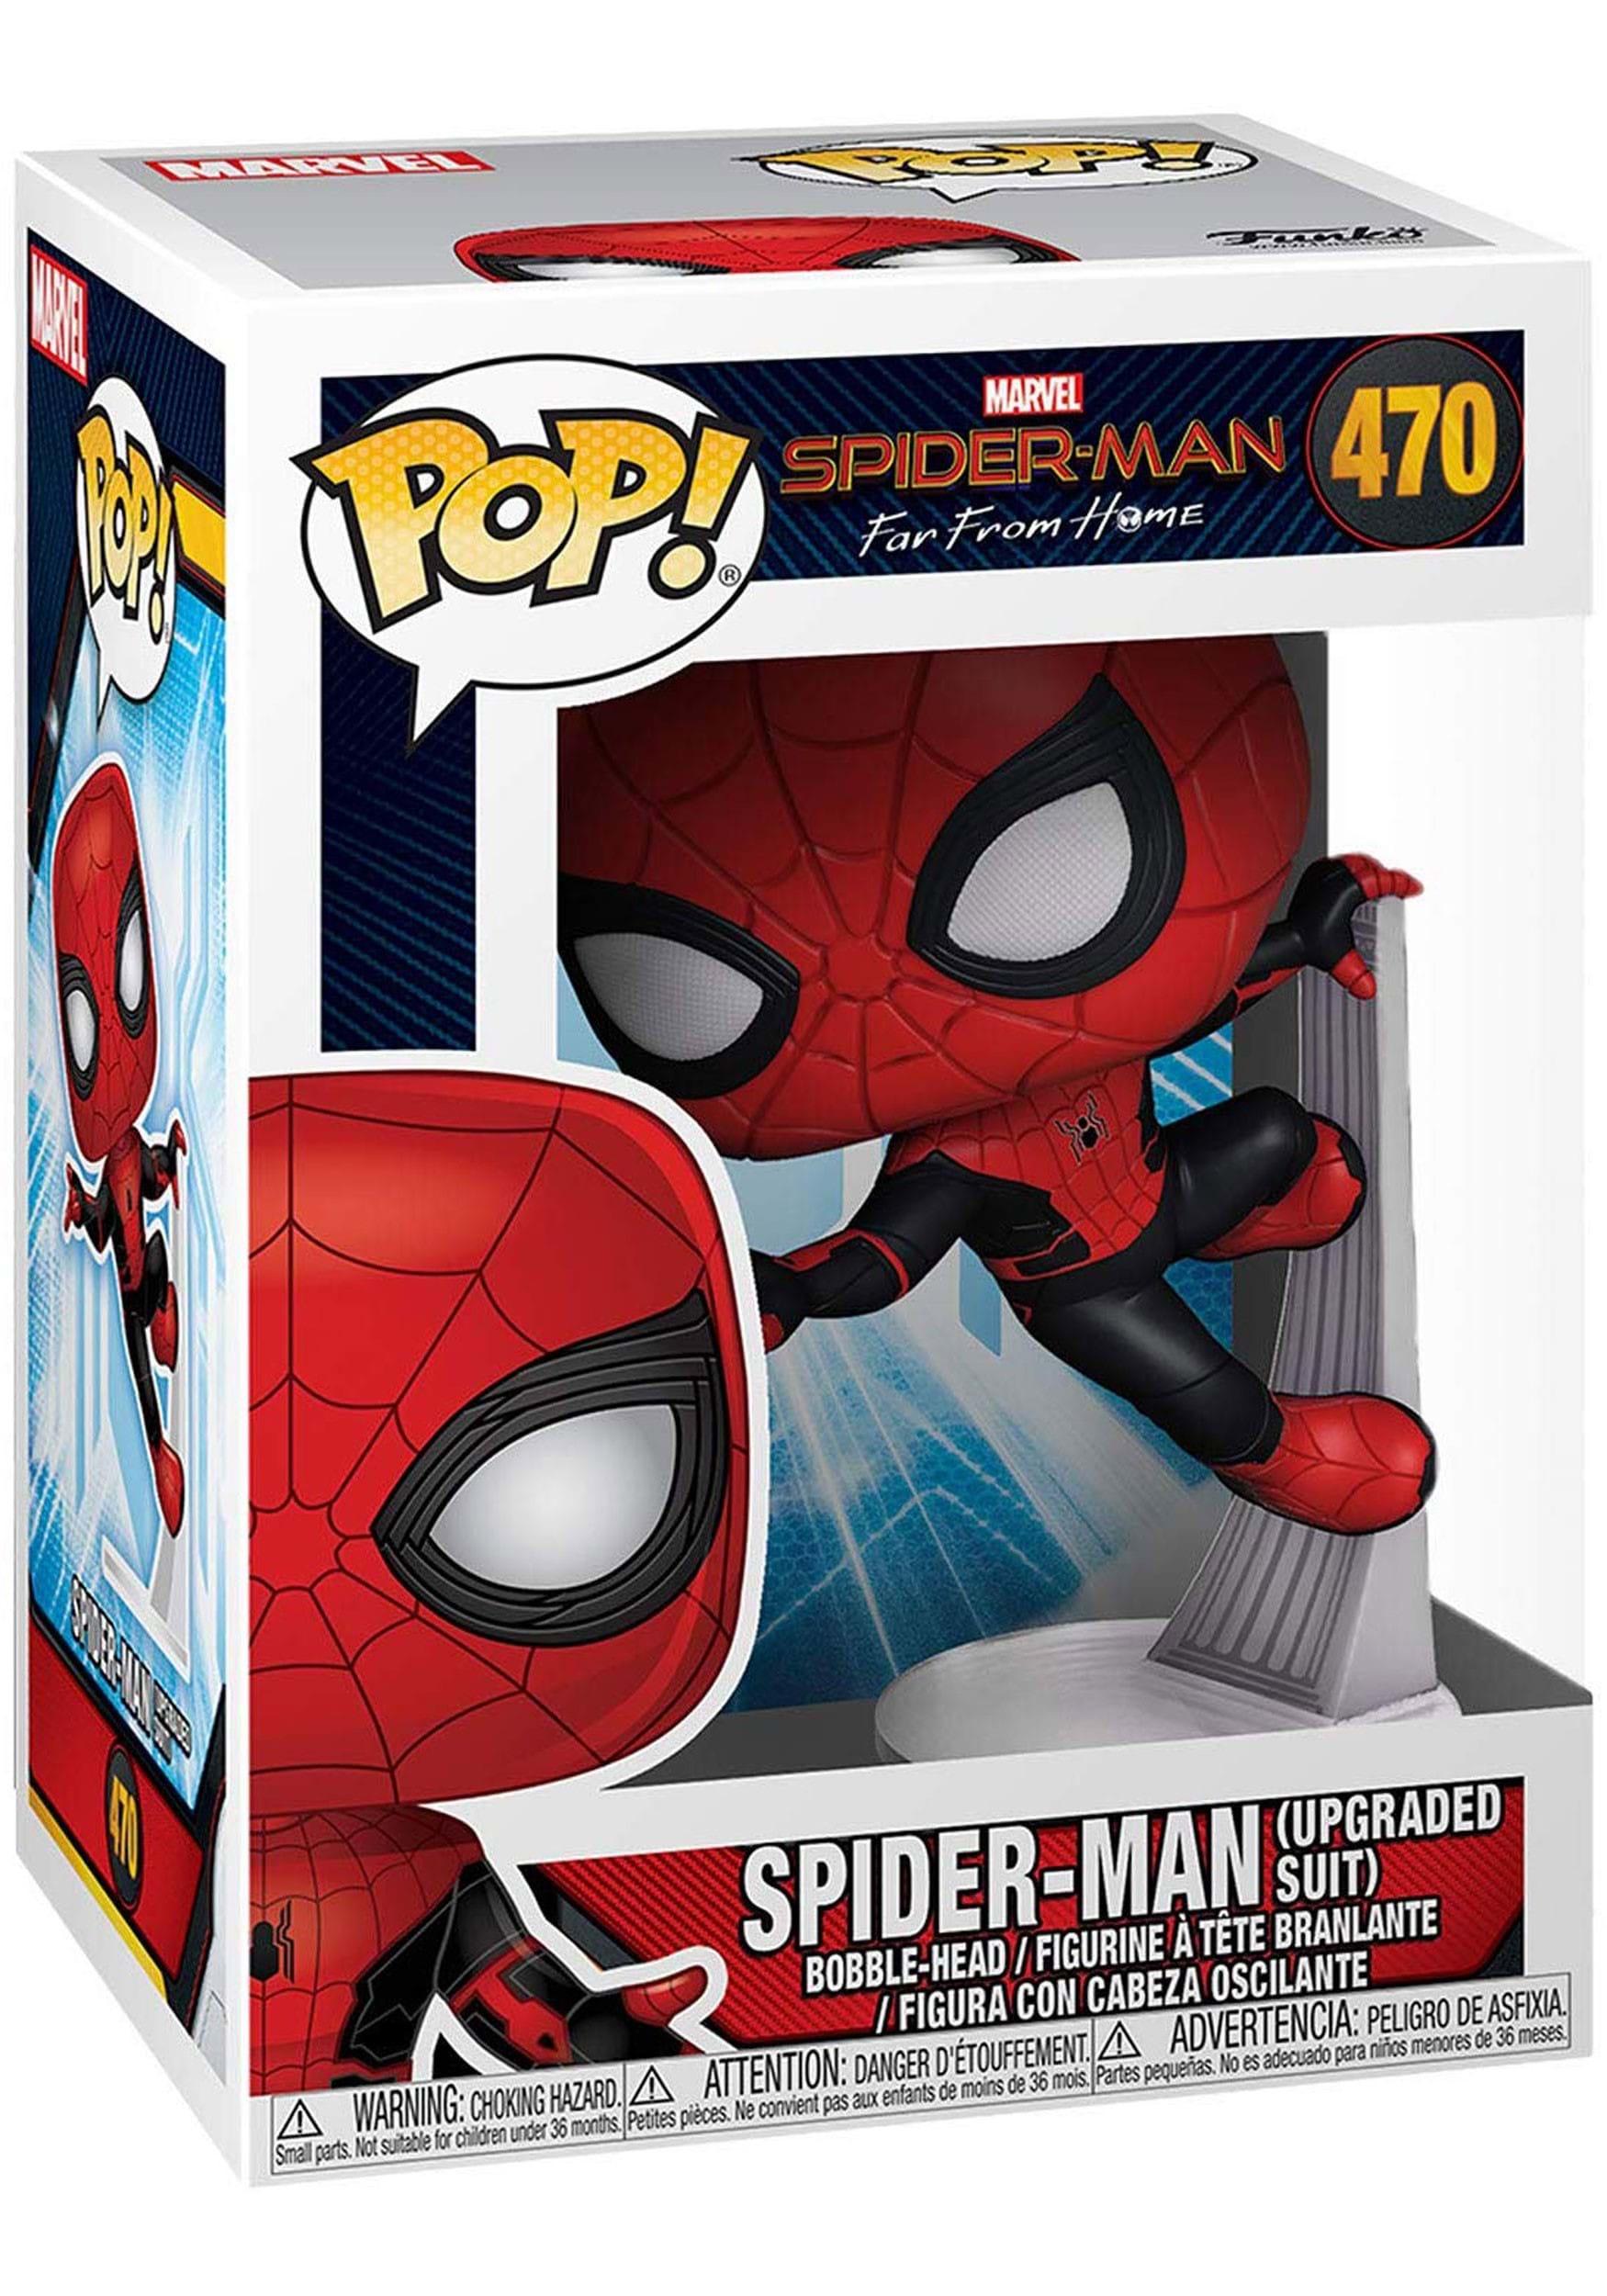 Funko Pop! MarvelSpiderMan Far From Home SpiderMan (Upgraded Suit)